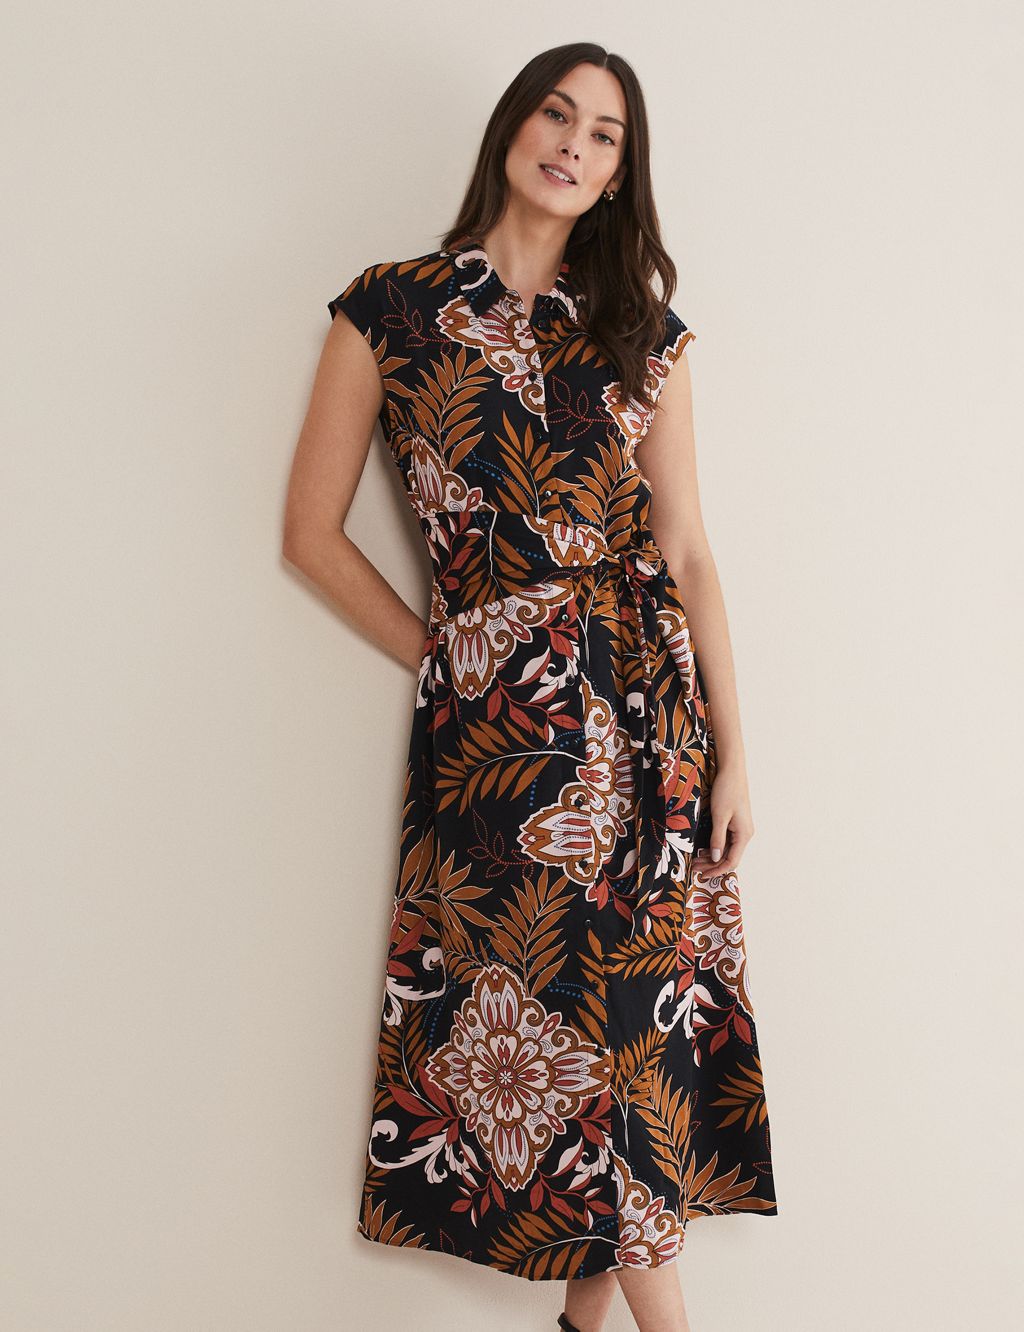 Printed Tie Front Midaxi Waisted Dress image 1